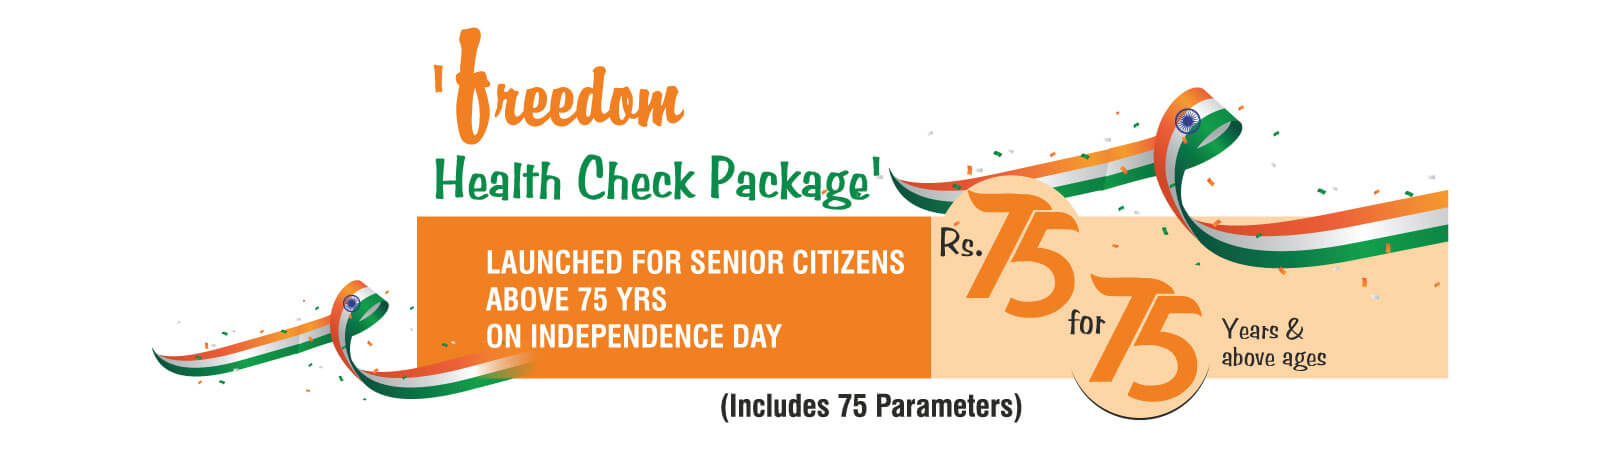 Freedom Health Check Package